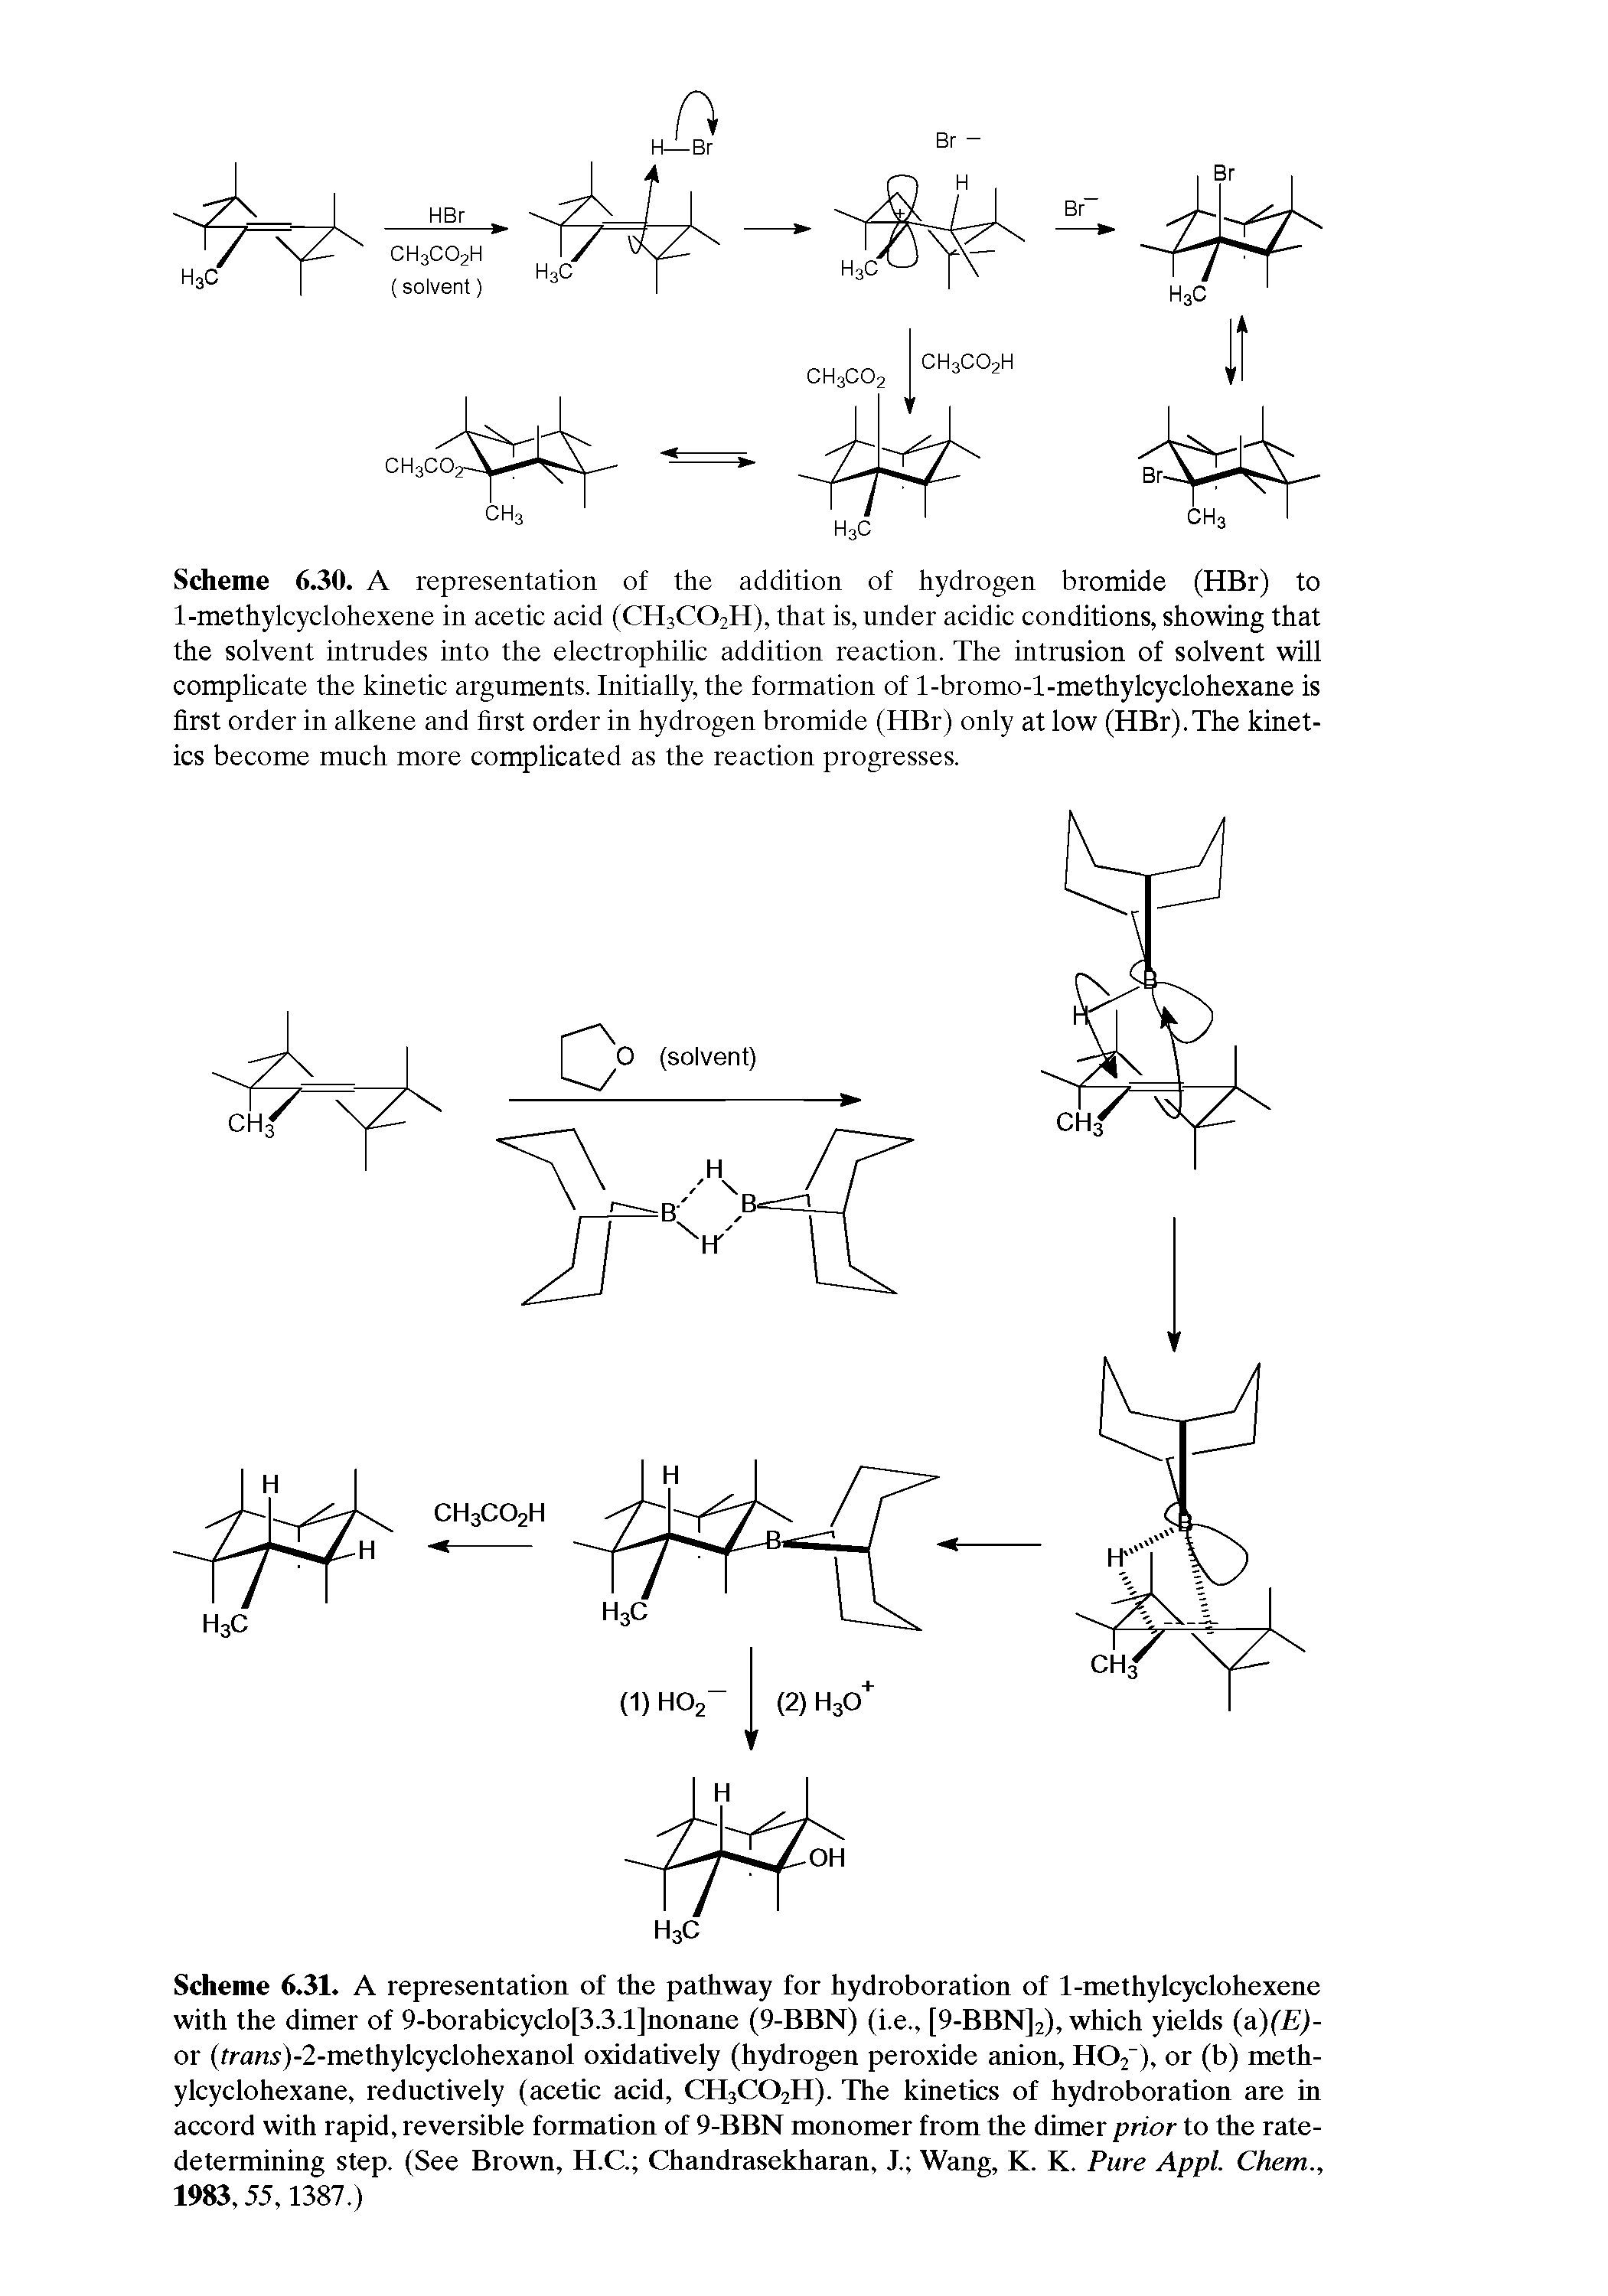 Scheme 6.30. A representation of the addition of hydrogen bromide (HBr) to 1-methylcyclohexene in acetic acid (CH3CO2H), that is, under acidic conditions, showing that the solvent intrudes into the electrophihc addition reaction. The intrusion of solvent will complicate the kinetic arguments. Initially, the formation of 1-bromo-l-methylcyclohexane is first order in alkene and first order in hydrogen bromide (HBr) only at low (HBr).The kinetics become much more complicated as the reaction progresses.